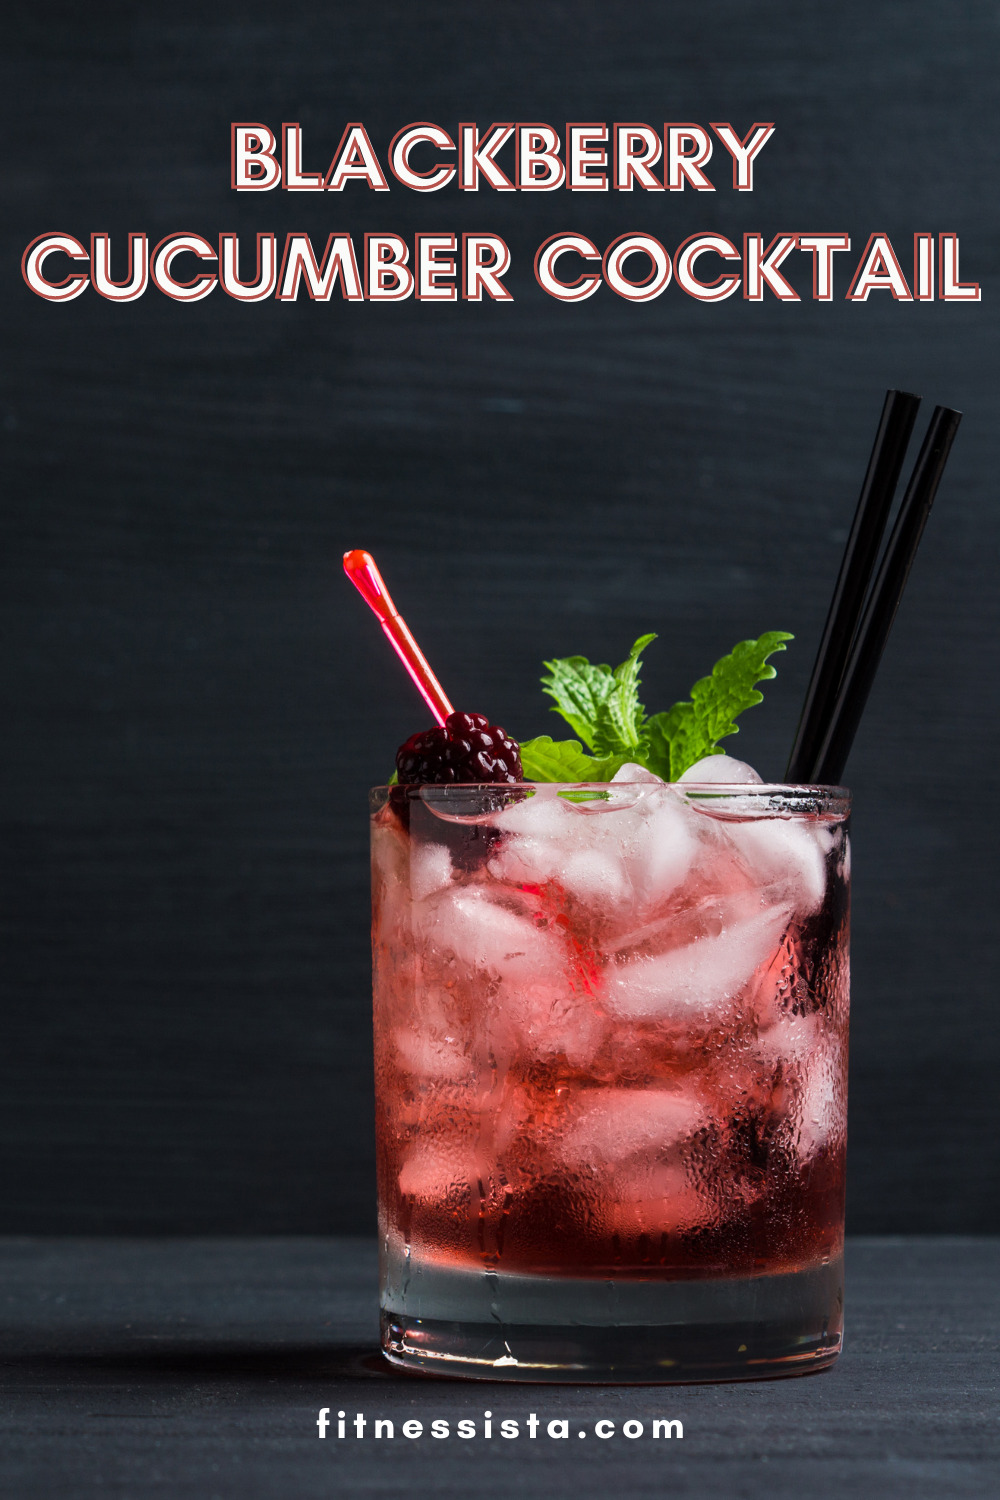 black cucumber cocktail - Blackberry Cucumber Cocktail - The Fitnessista